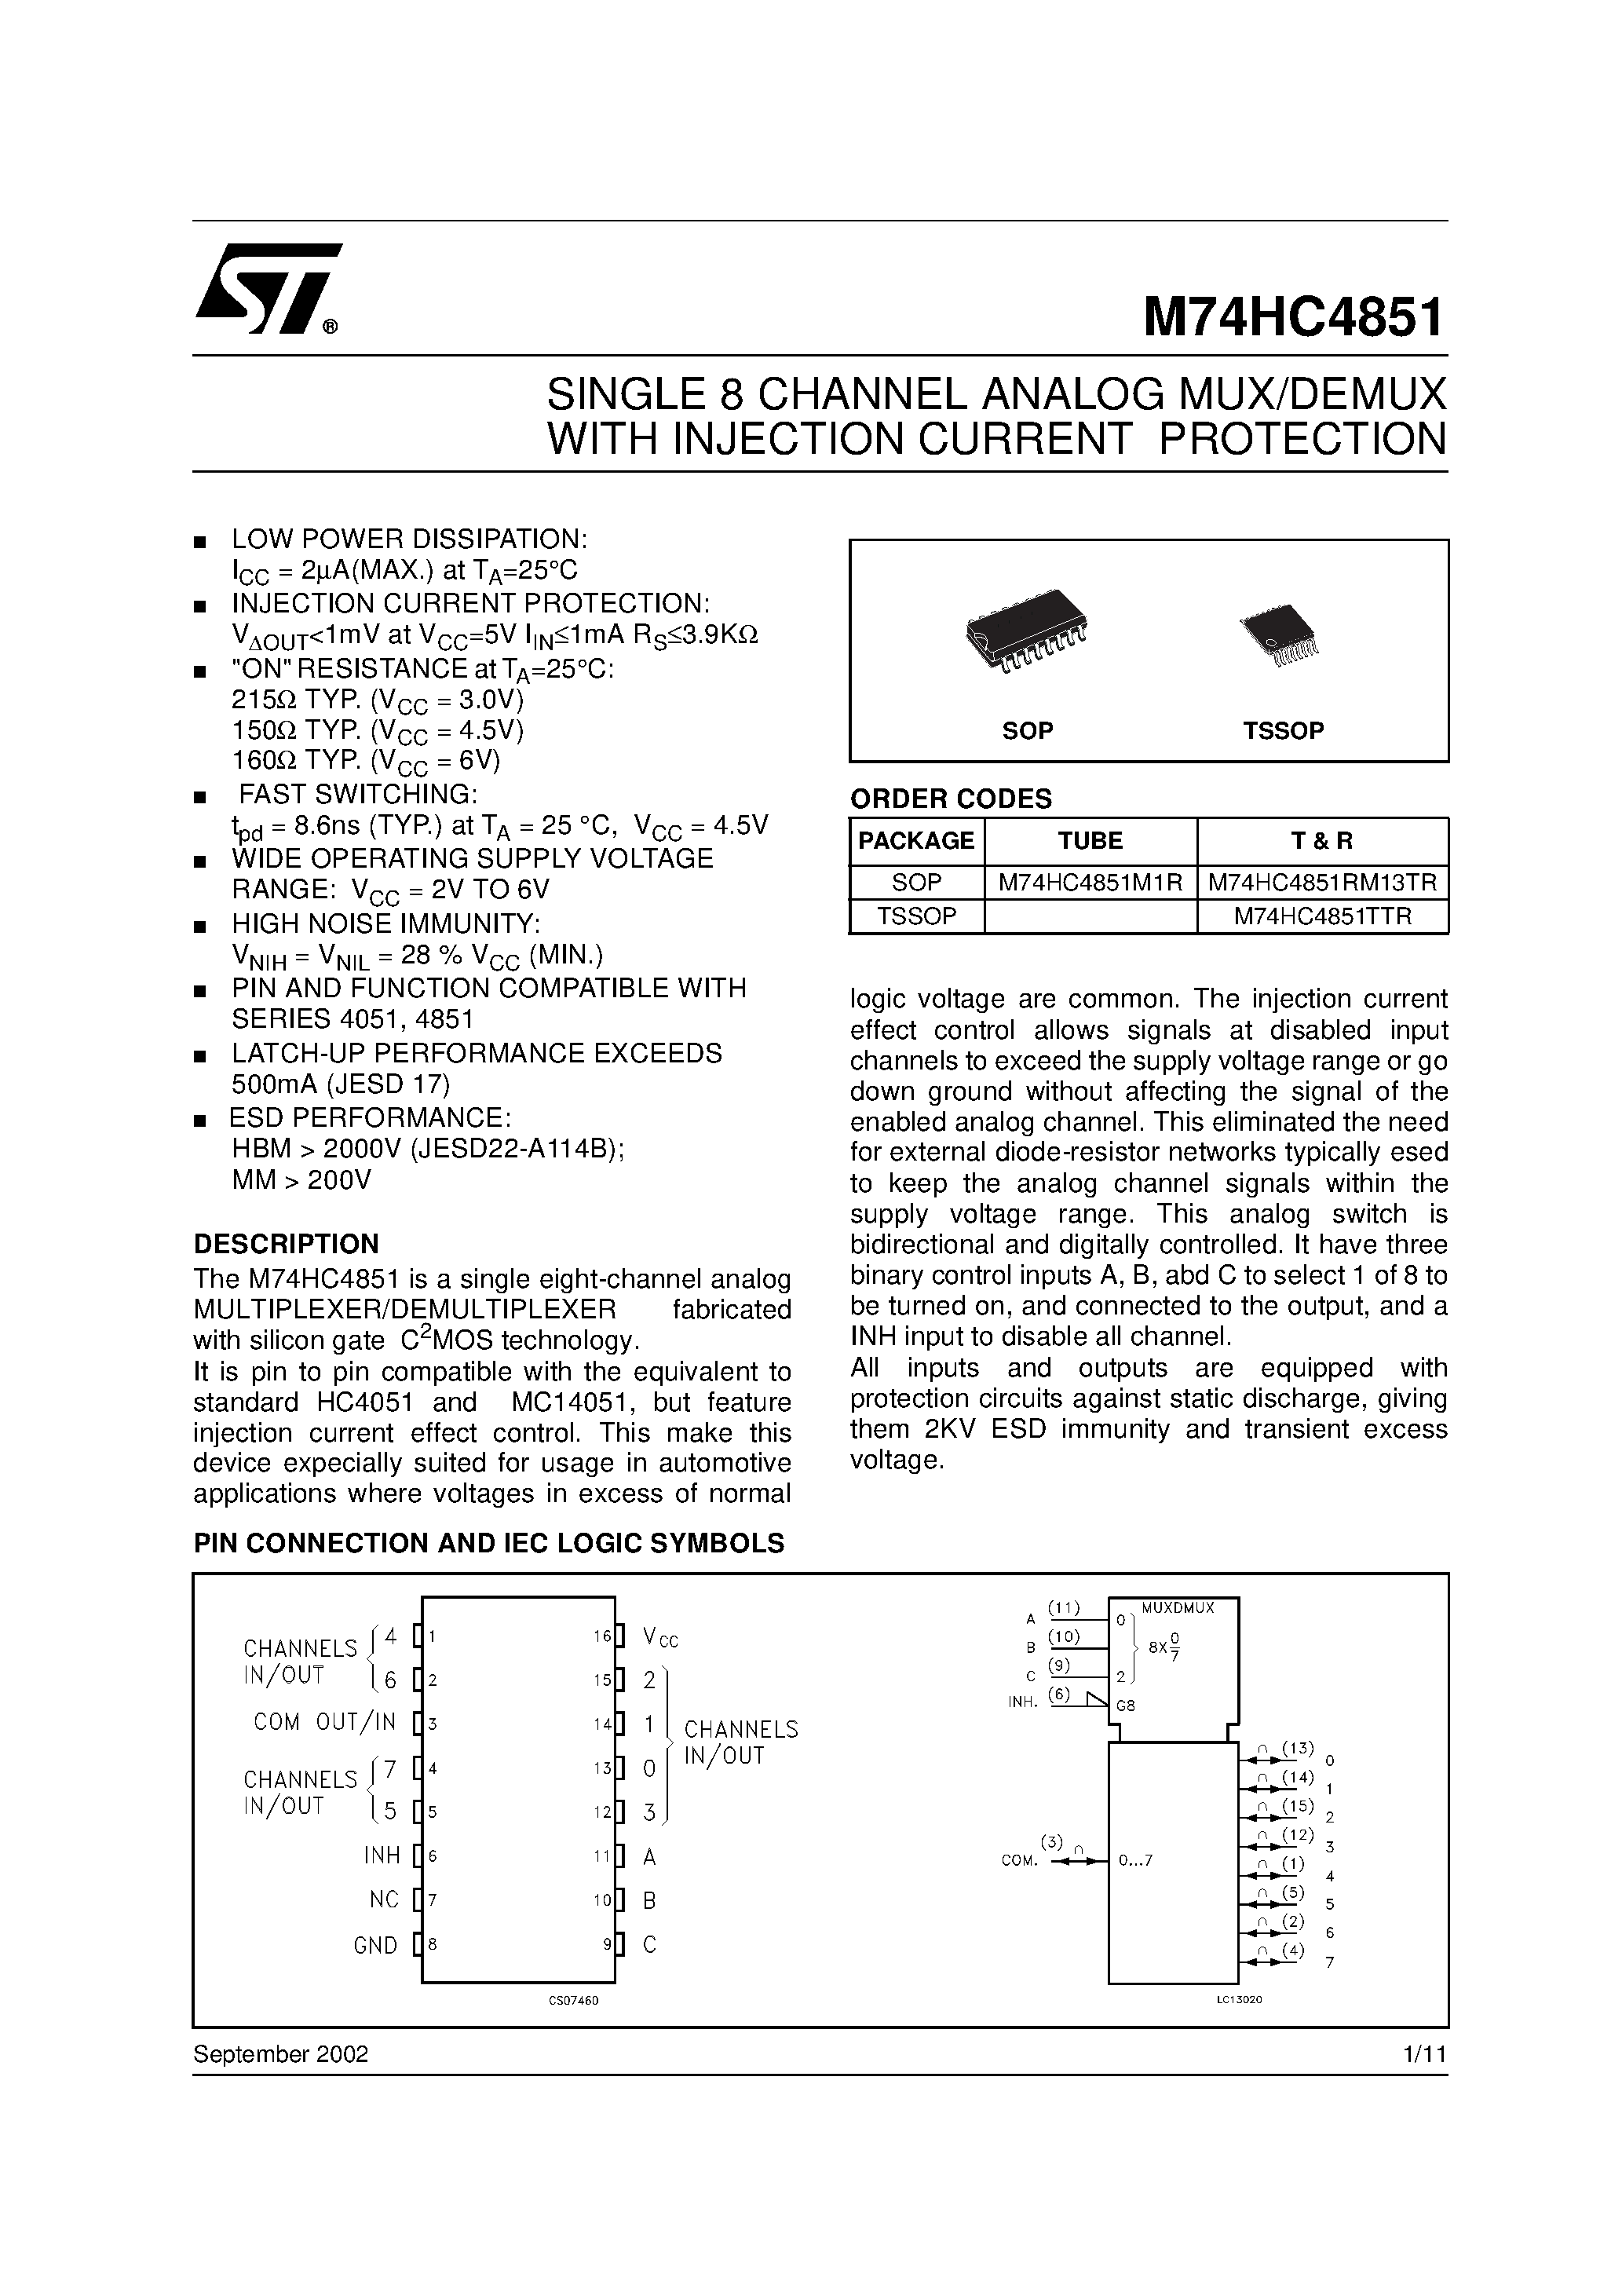 Datasheet M74HC4851 - SINGLE 8 CHANNEL ANALOG MUX/DEMUX WITH INJECTION CURRENT PROTECTION page 1